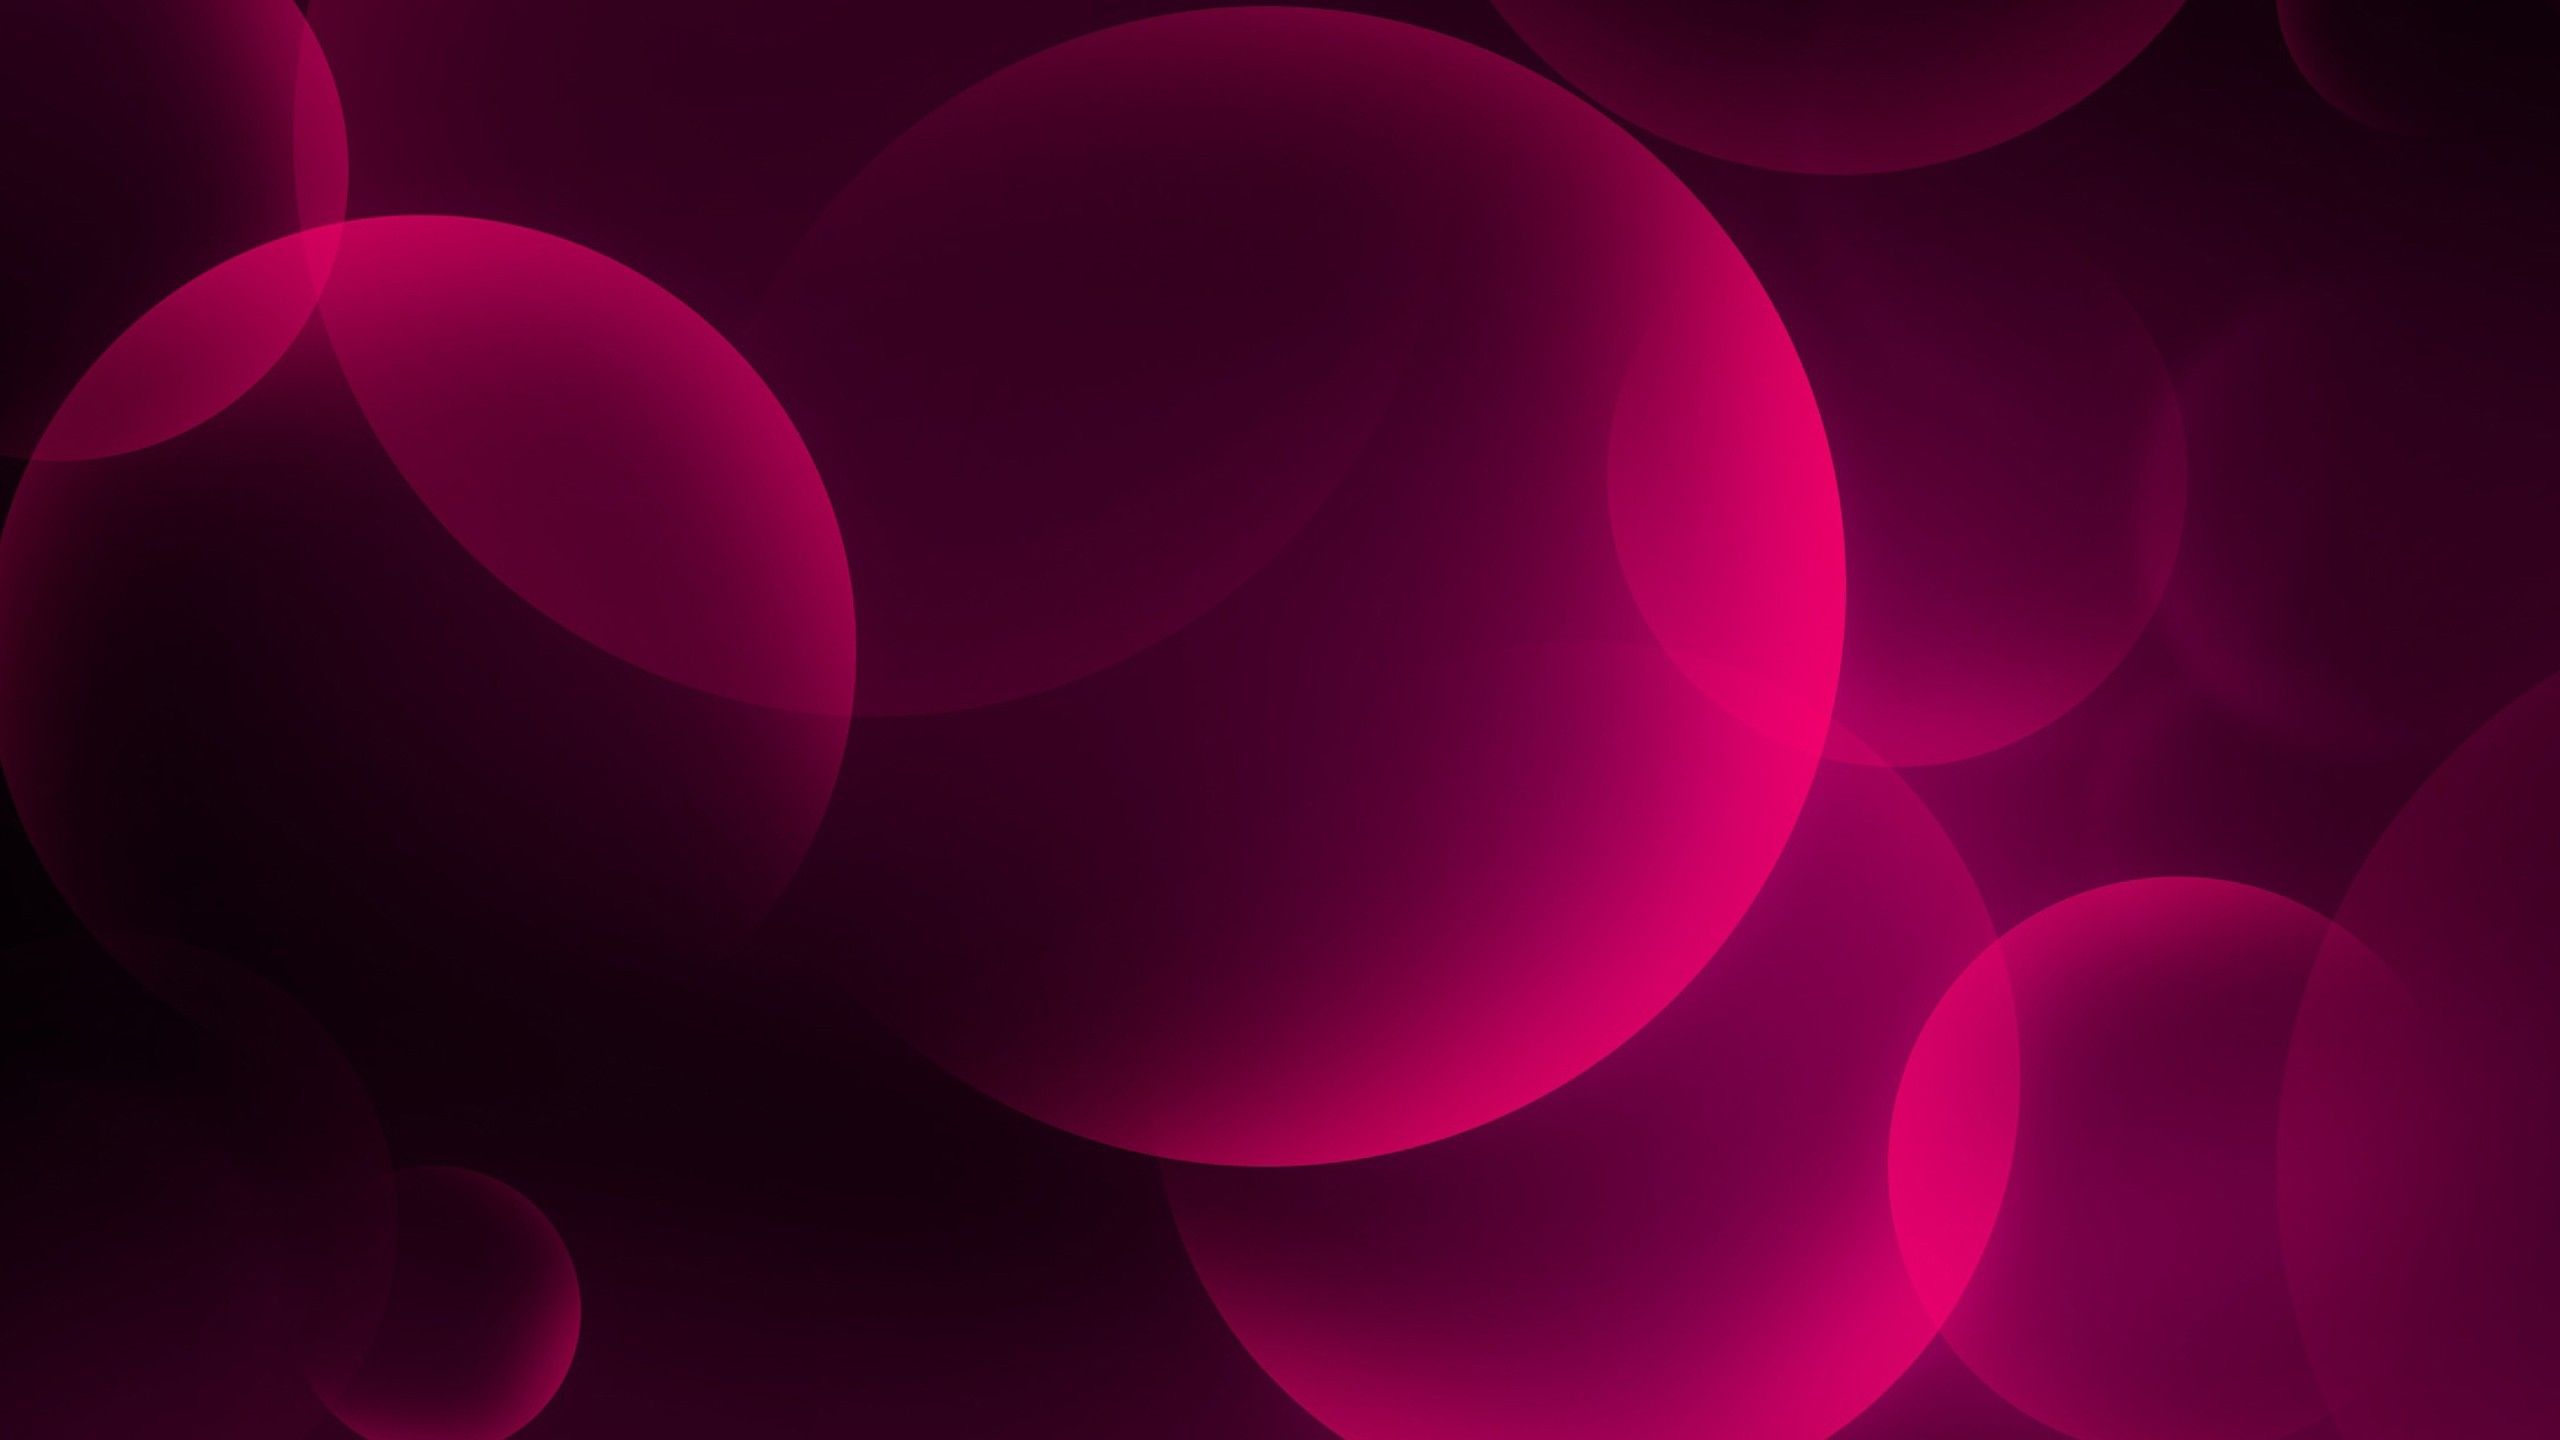 A pink and purple abstract background with circles - Bubbles